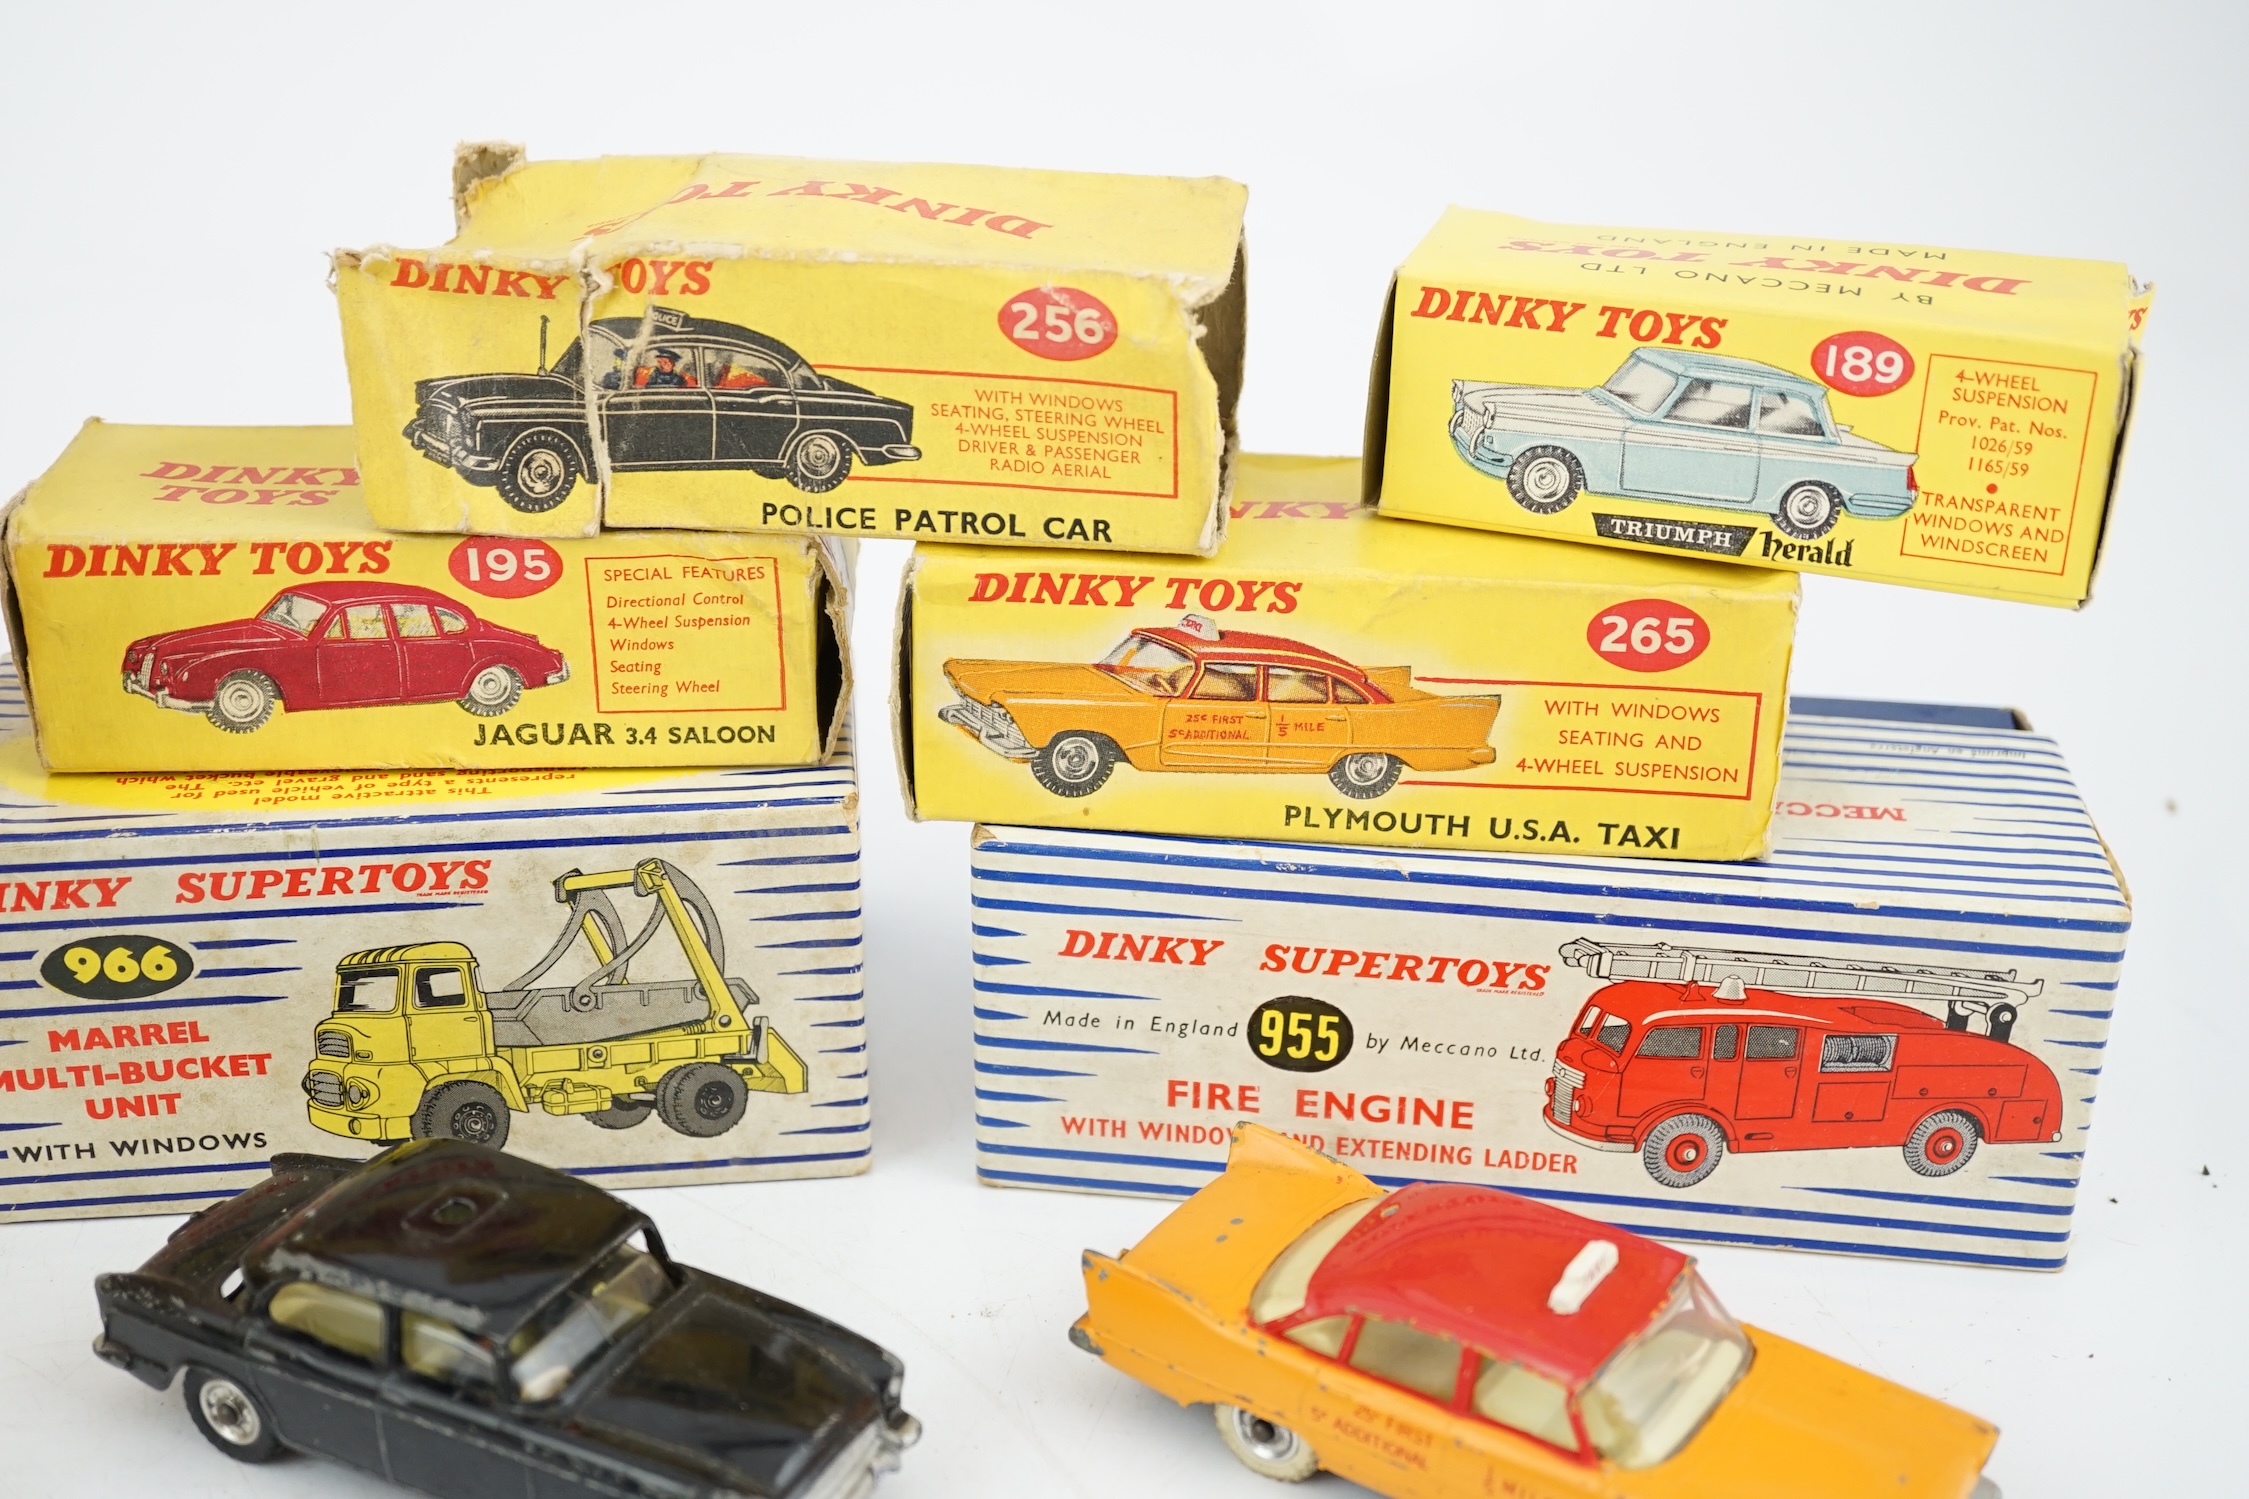 Eleven boxed Dinky Toys; a Triumph Herald (189), a Plymouth U.S.A. Taxi (265), a Chevrolet ‘El - Image 7 of 8